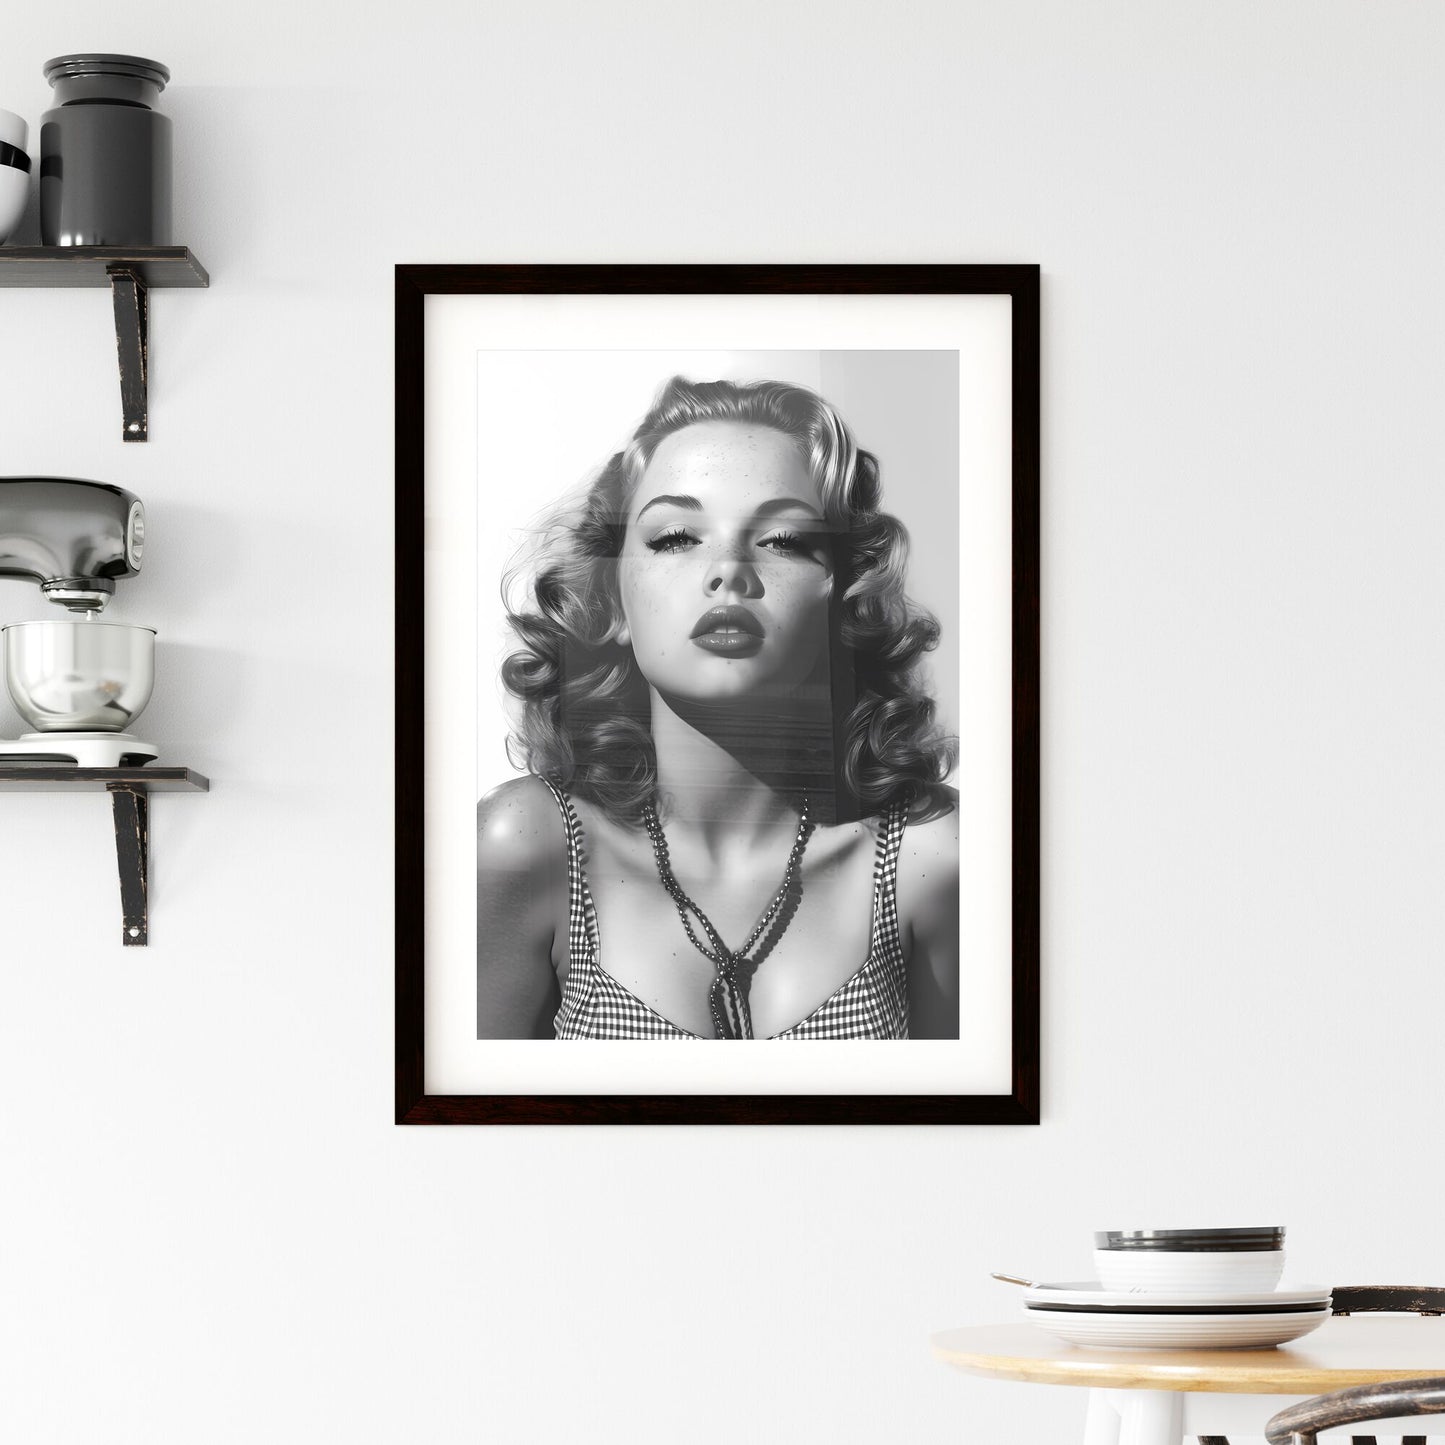 The vintage pin up girl - Art print of a woman with freckles and curly hair Default Title